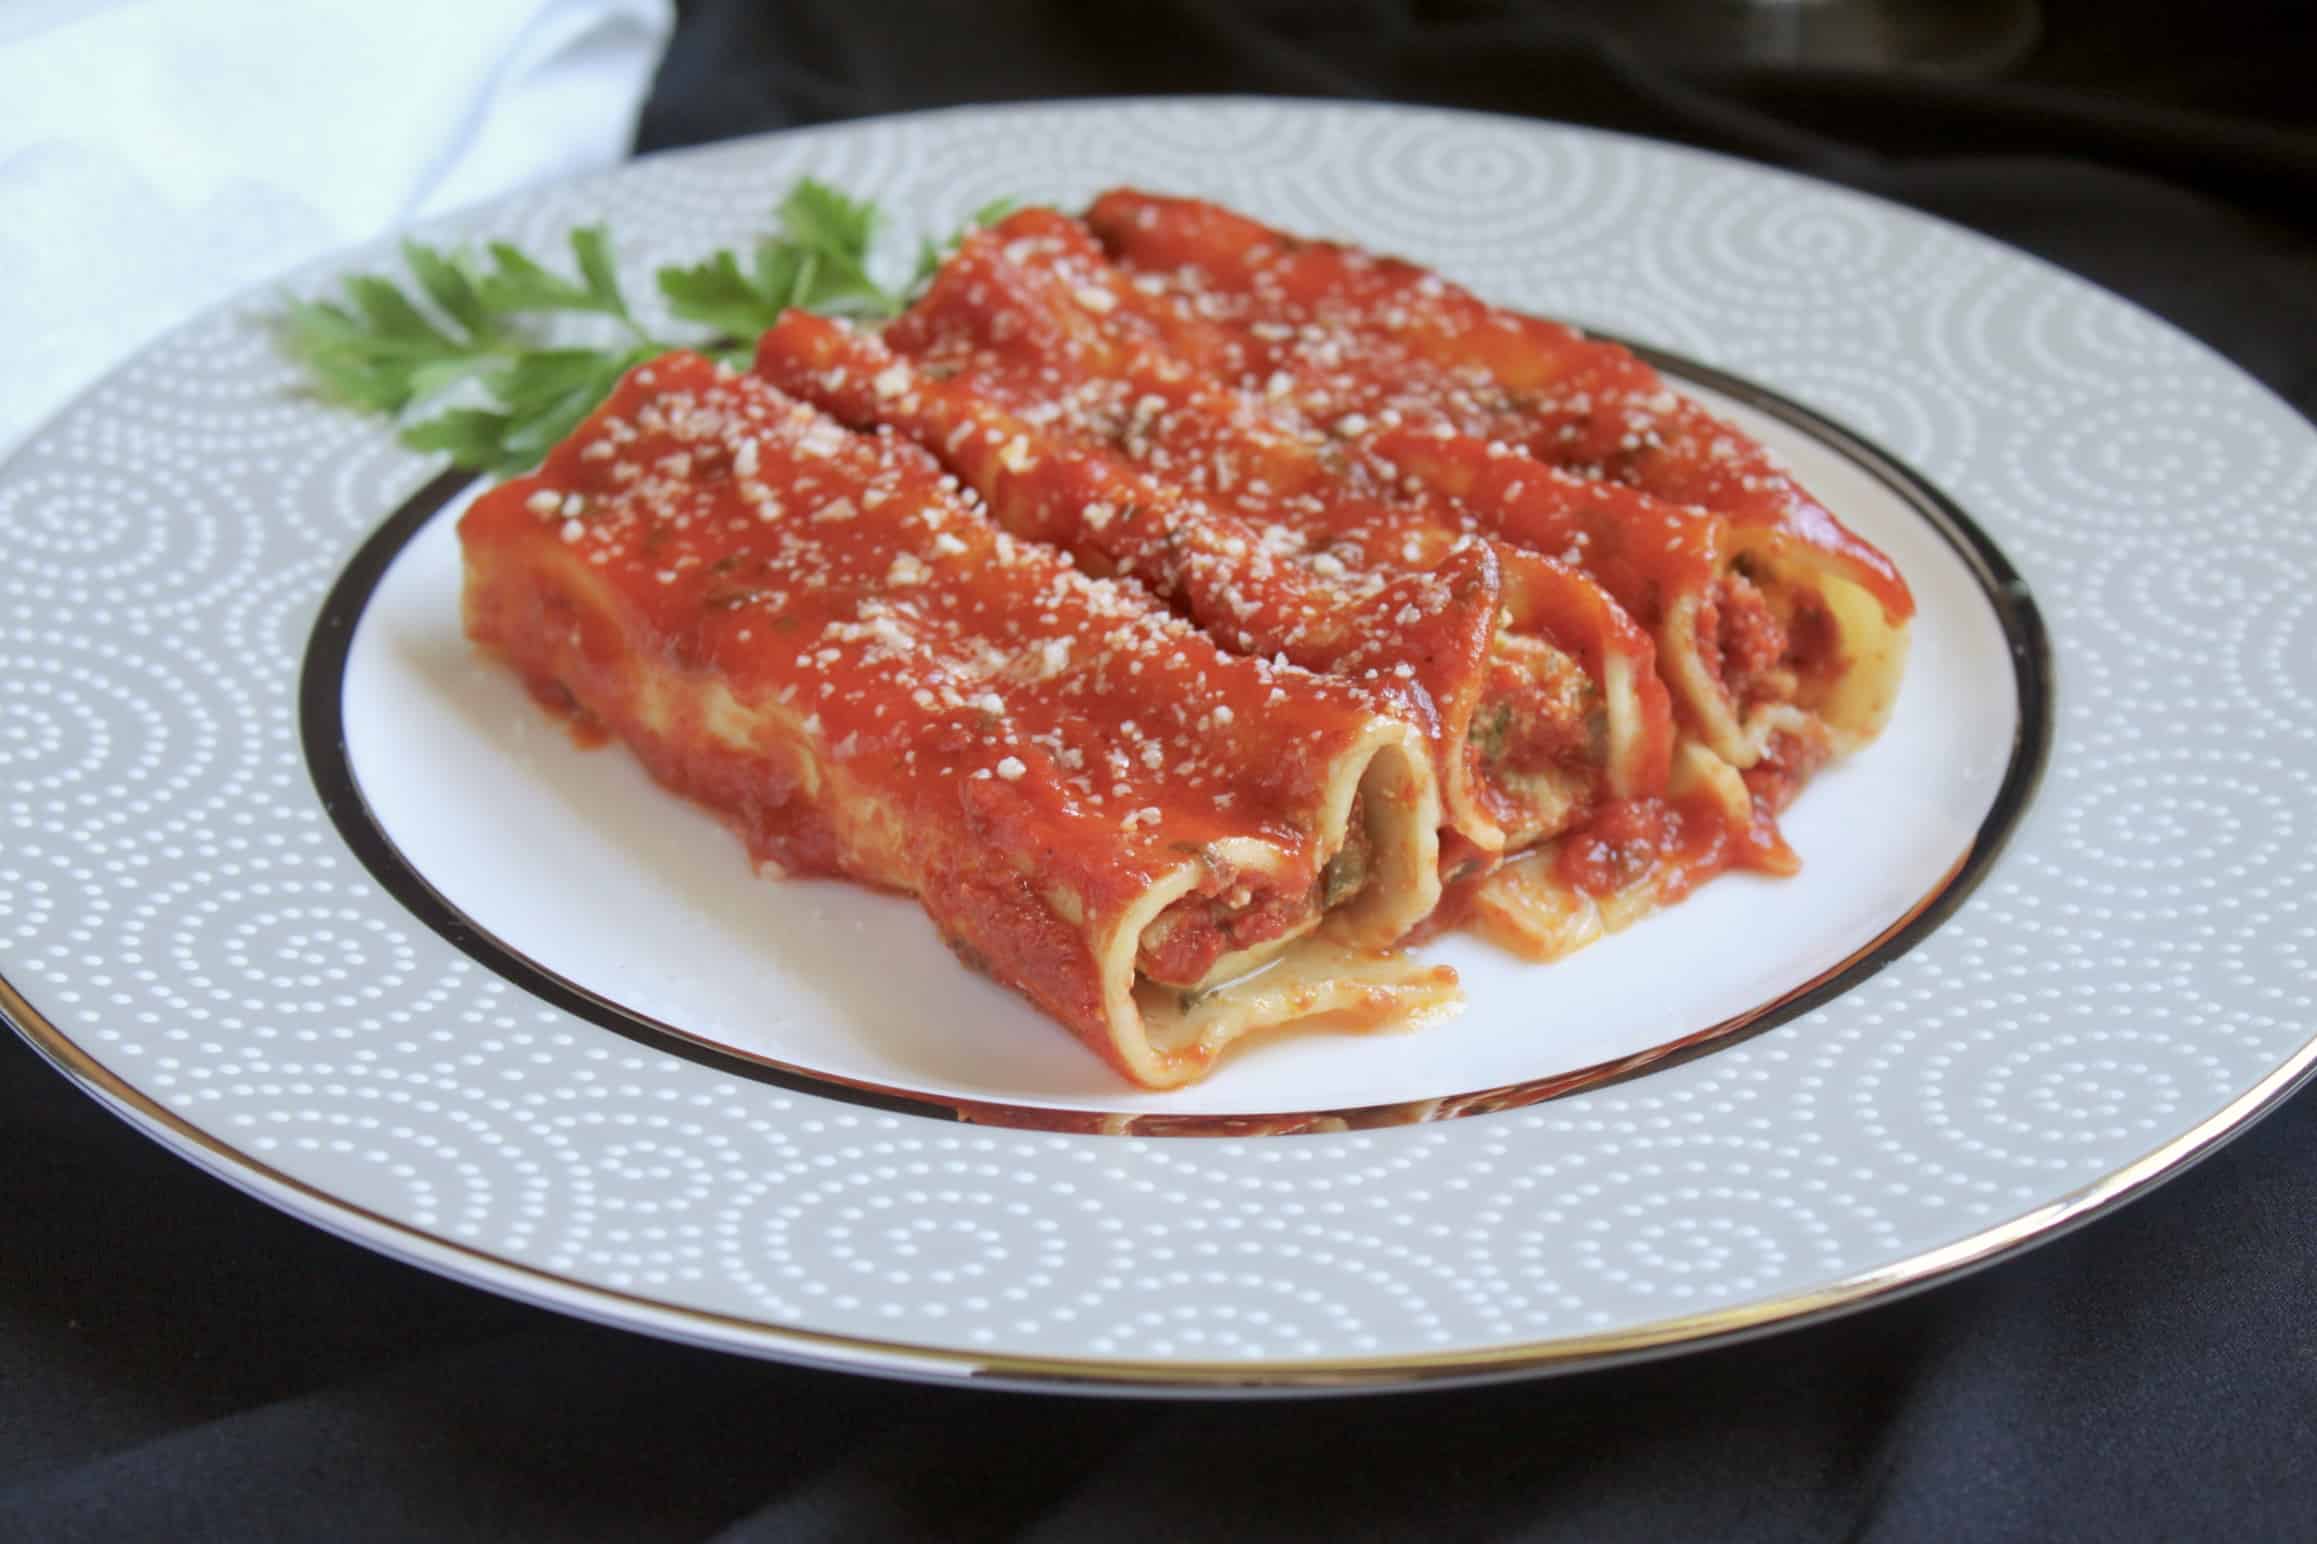 3 manicotti on a plate with parsley